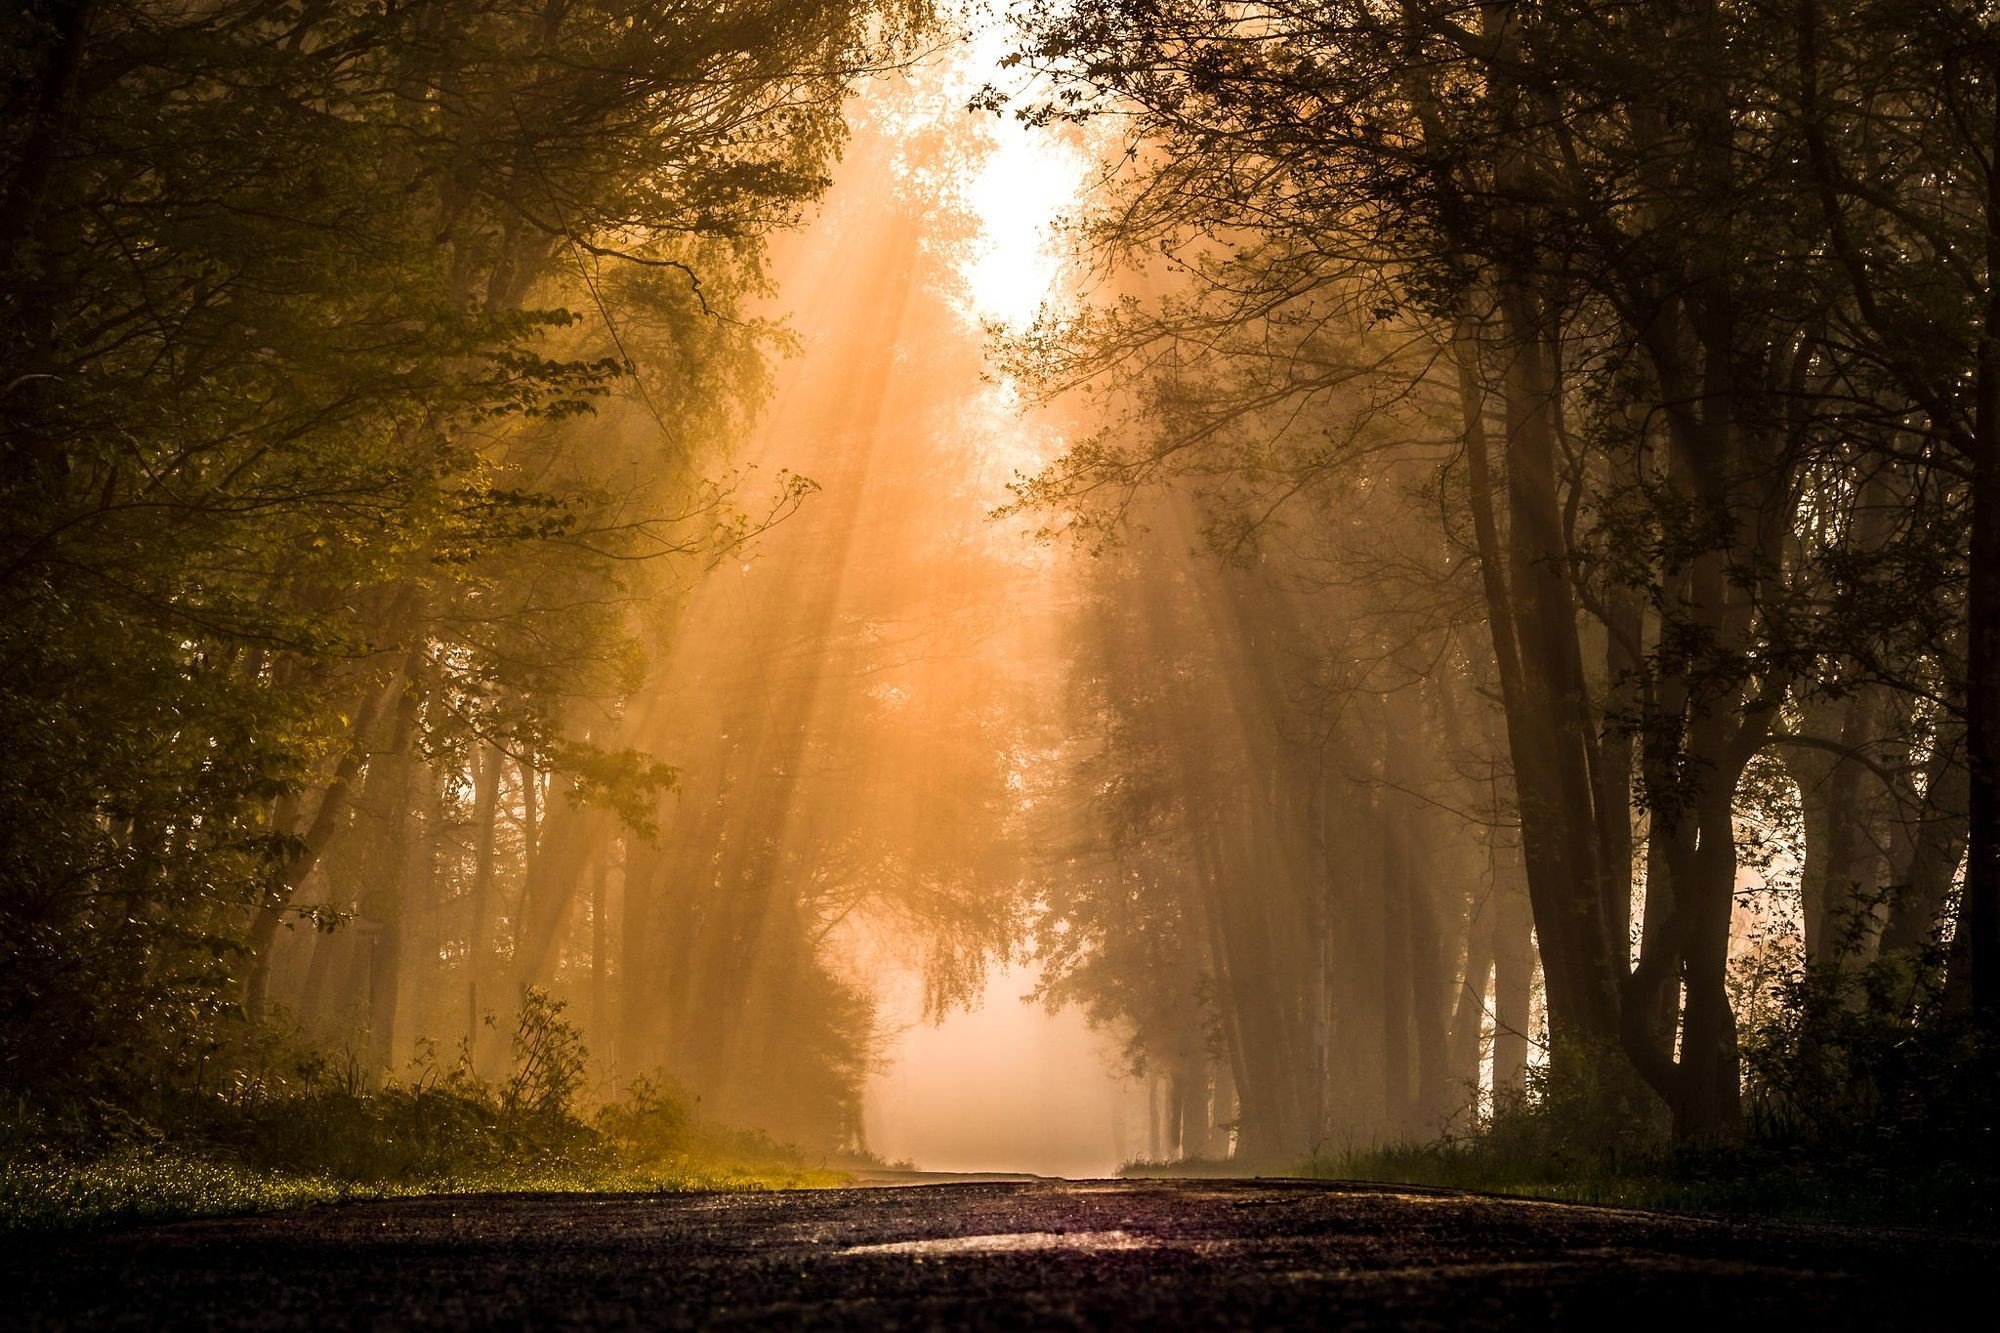 Road Forest Plants Sun Rays Mist Nature Trees Hd Wallpapers